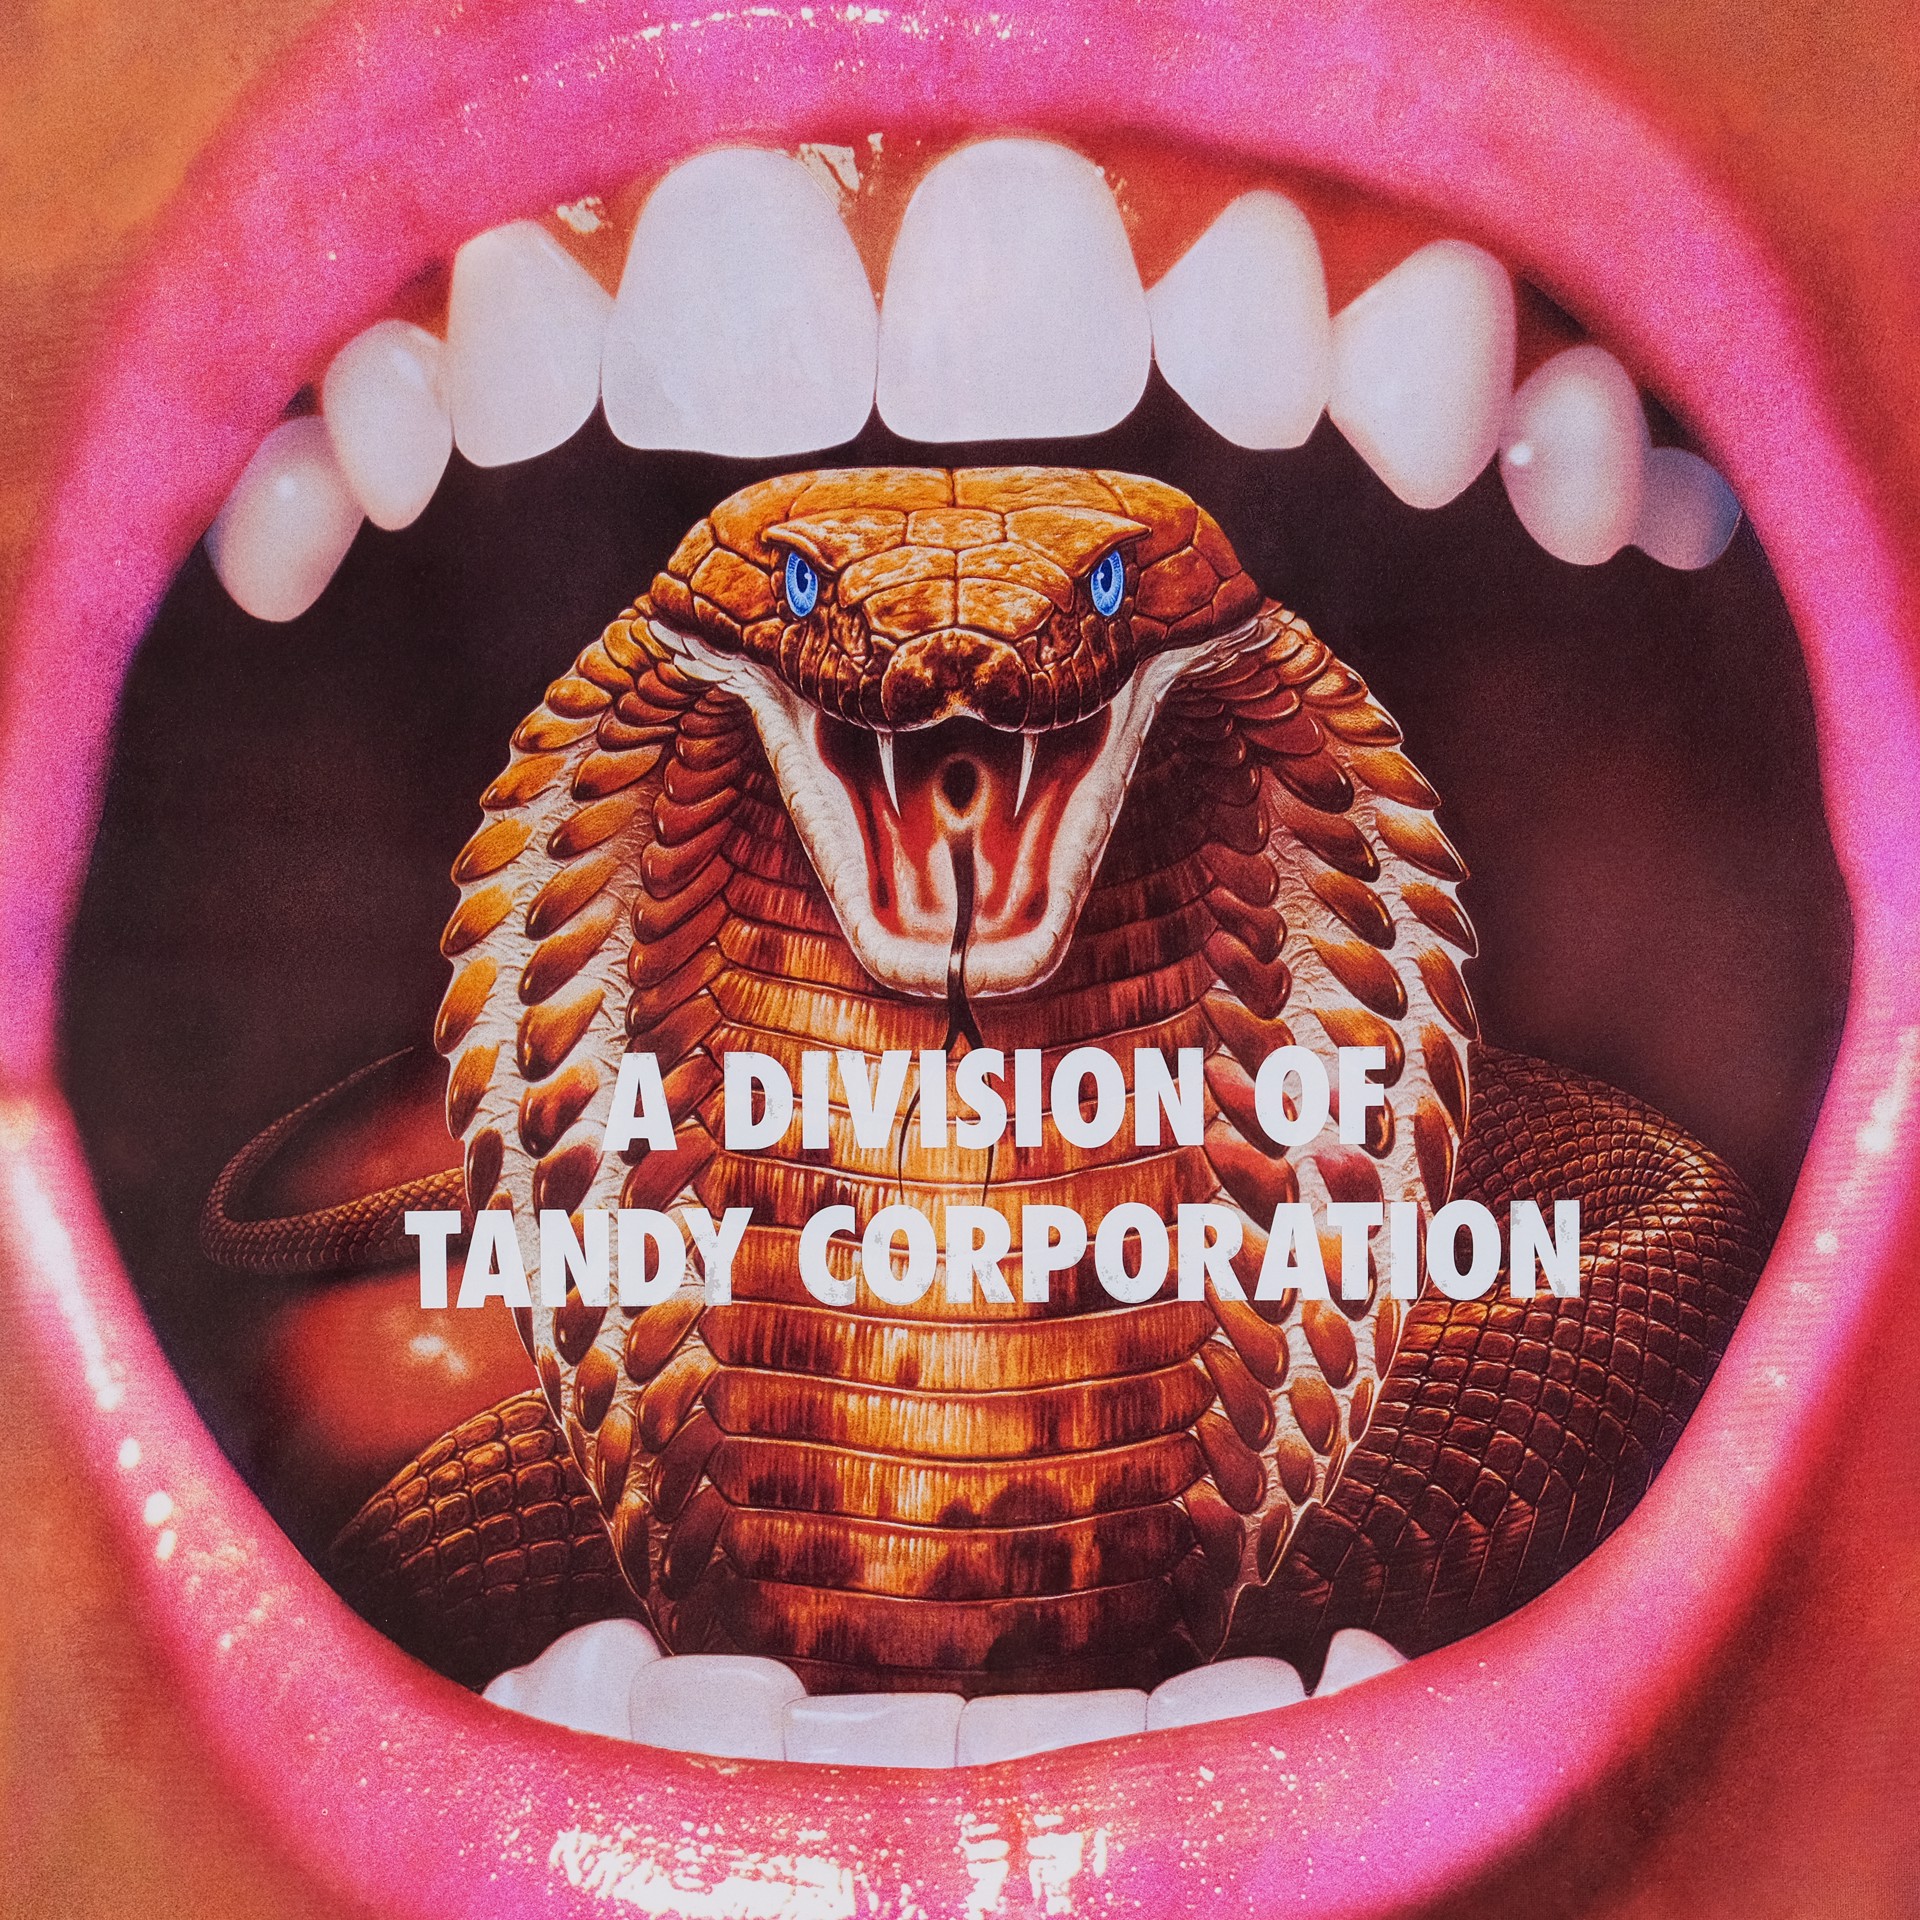 A Division of Tandy Corporation by Reed Weily